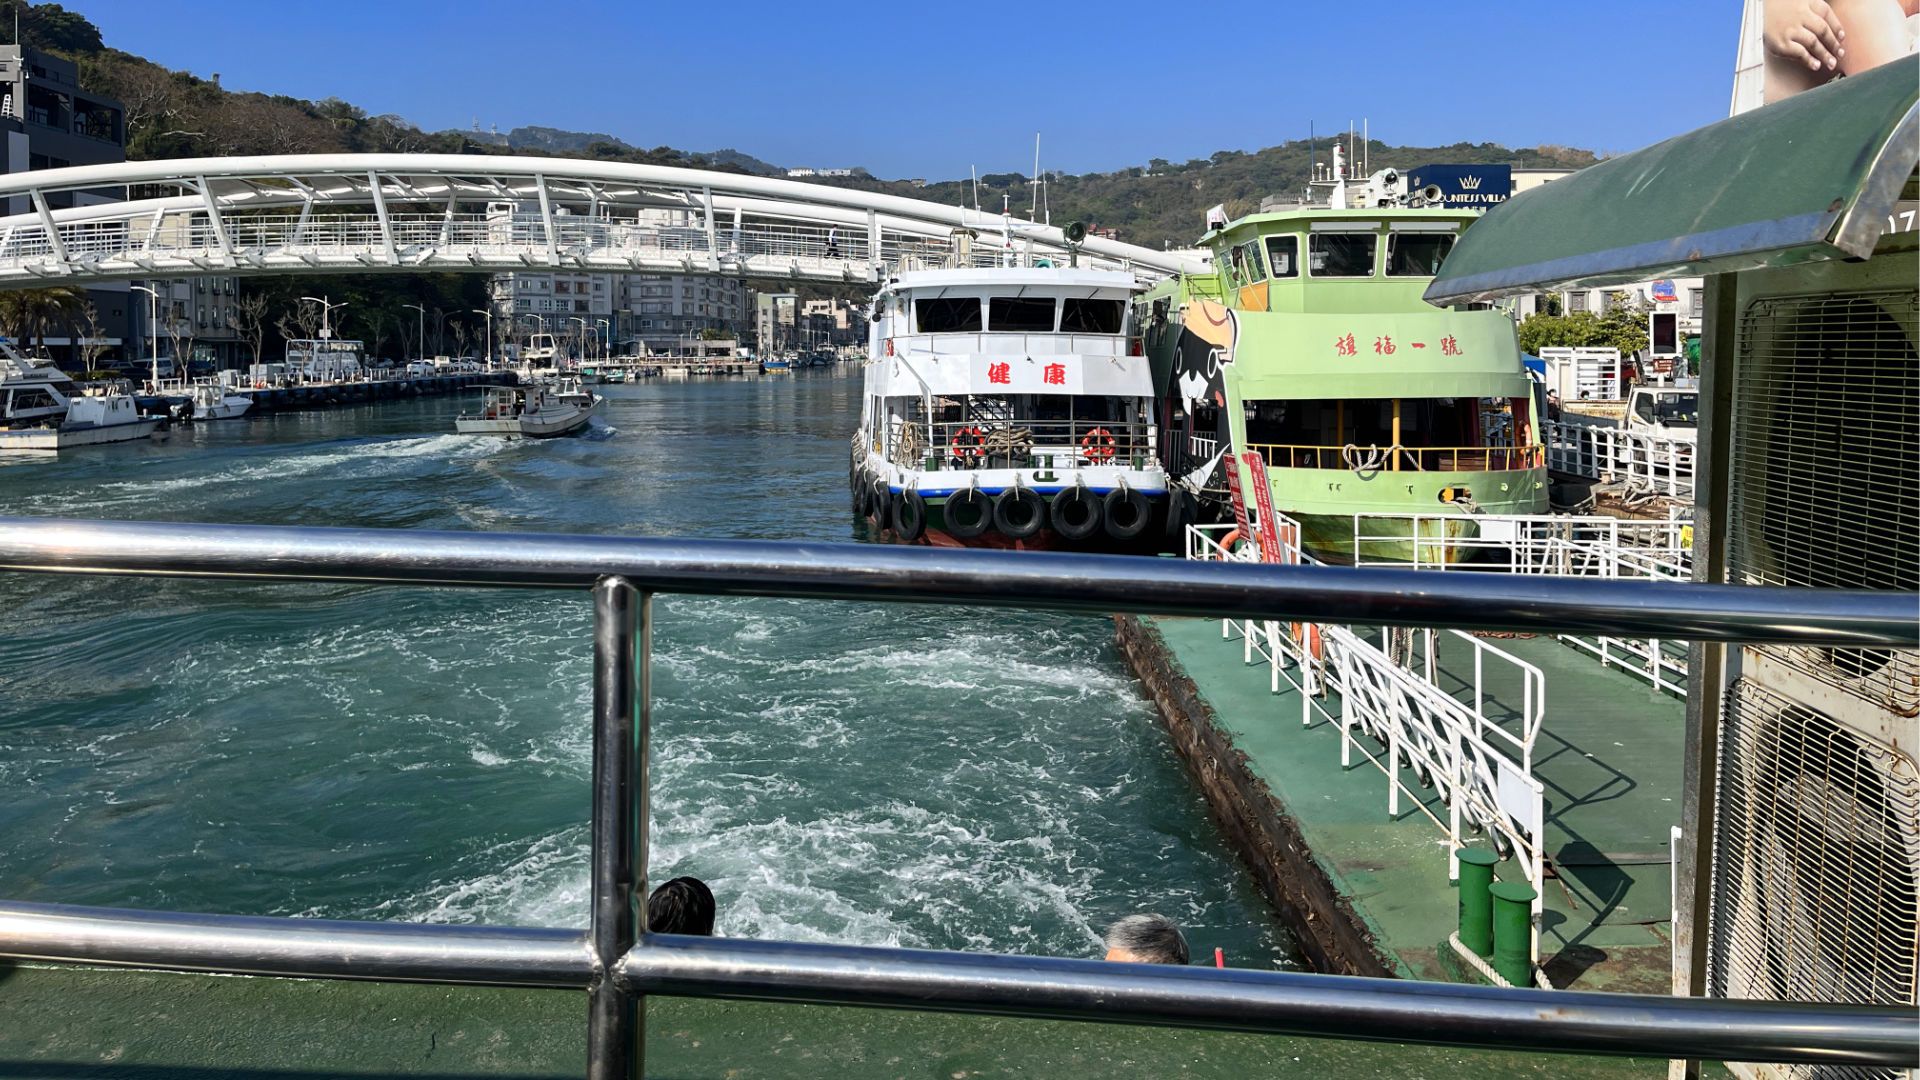 Arriving at the ferry terminal, as viewed from the top deck of the Cijin Island ferry, with two other ferries tied up at the dock.